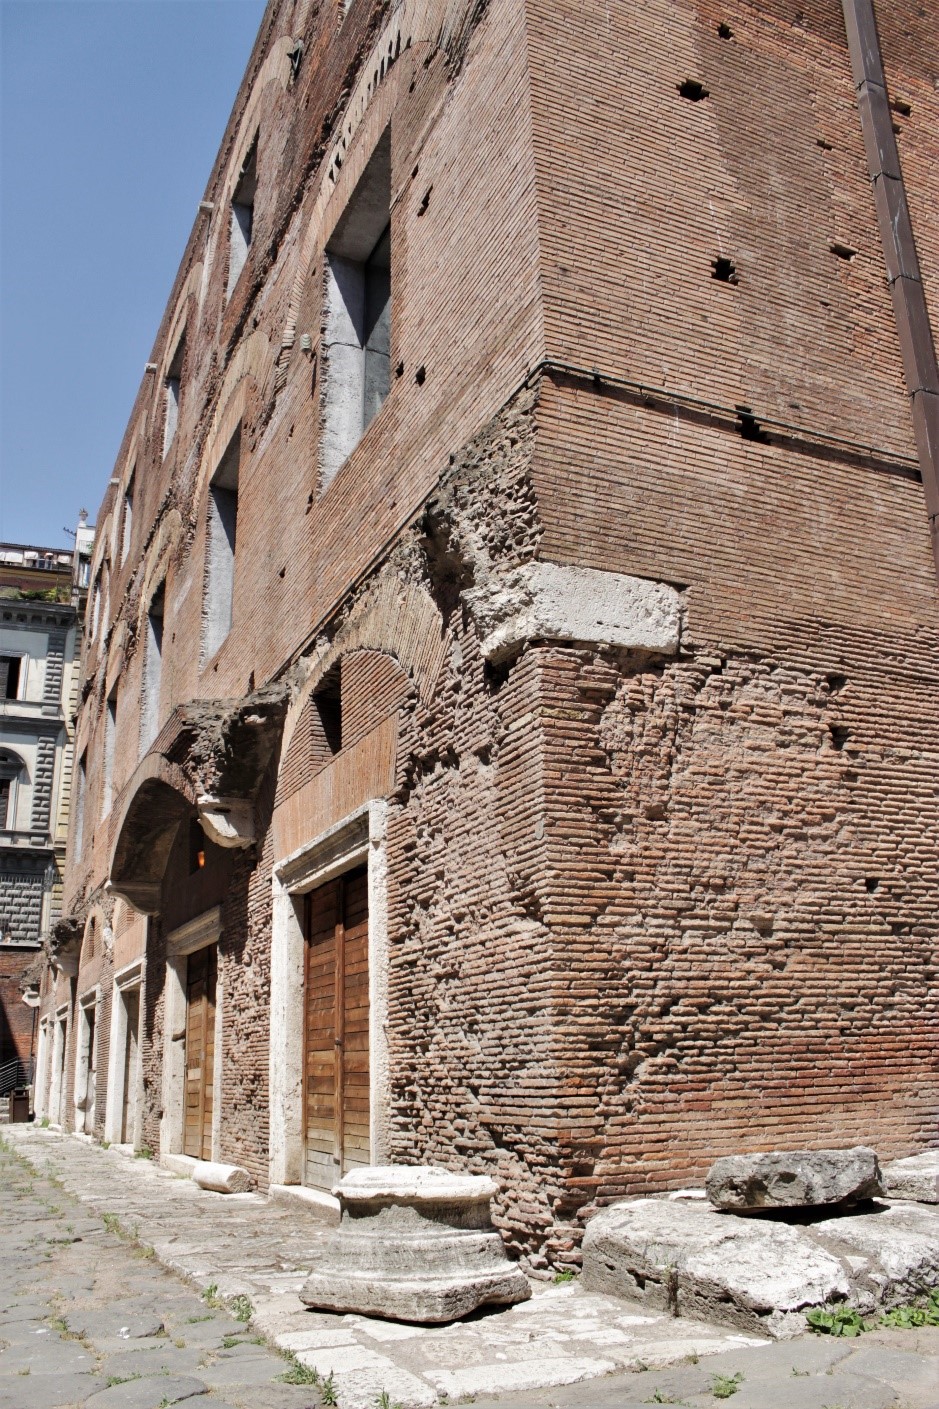  Structures at the base of Trajan’s market.